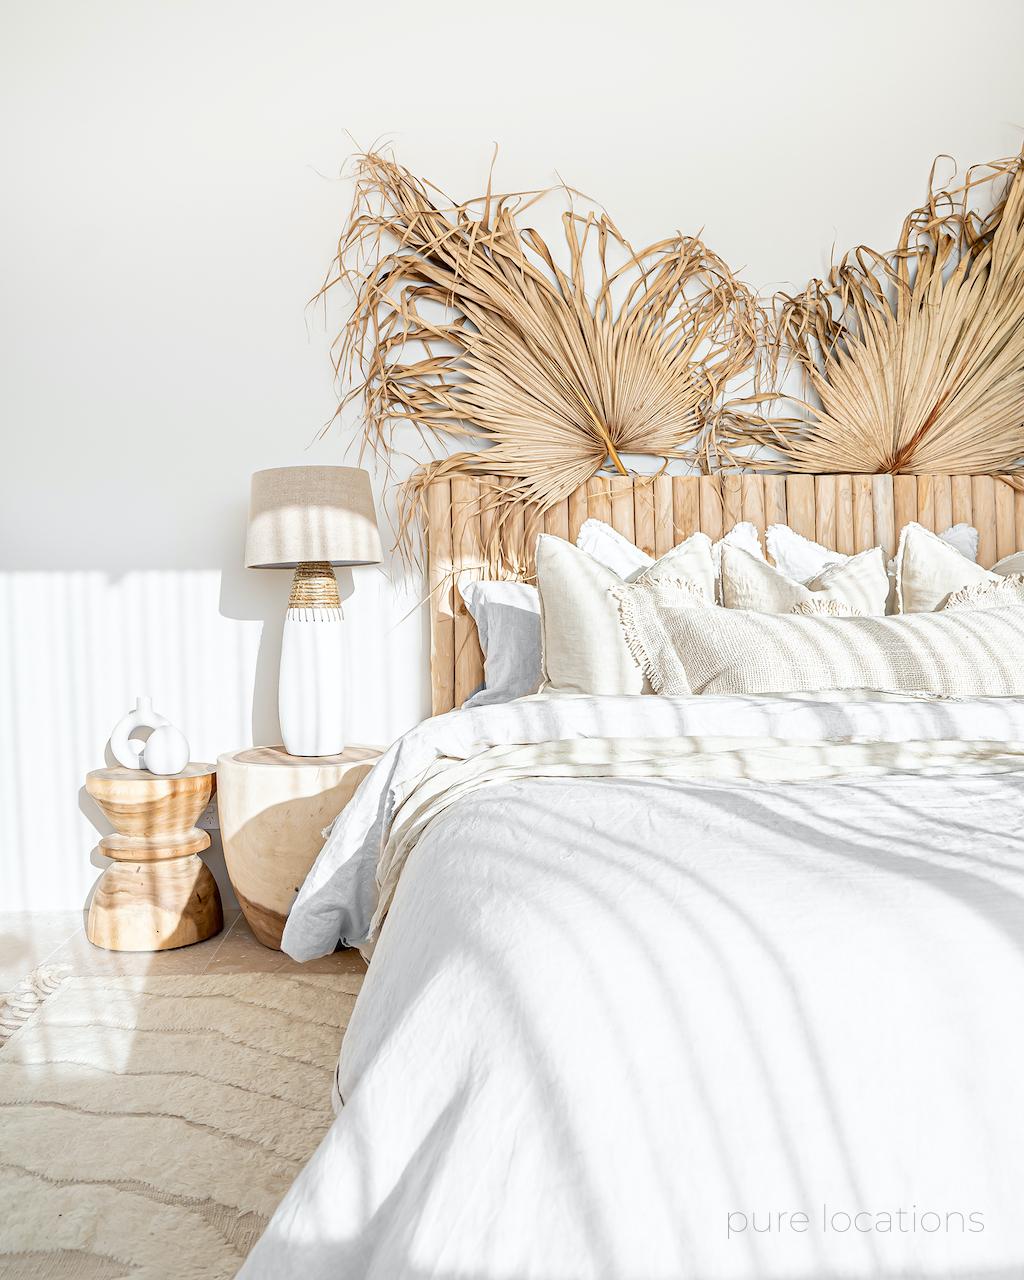 Timber bedhead with white linen and timber bedside tables, bohemian decorating style